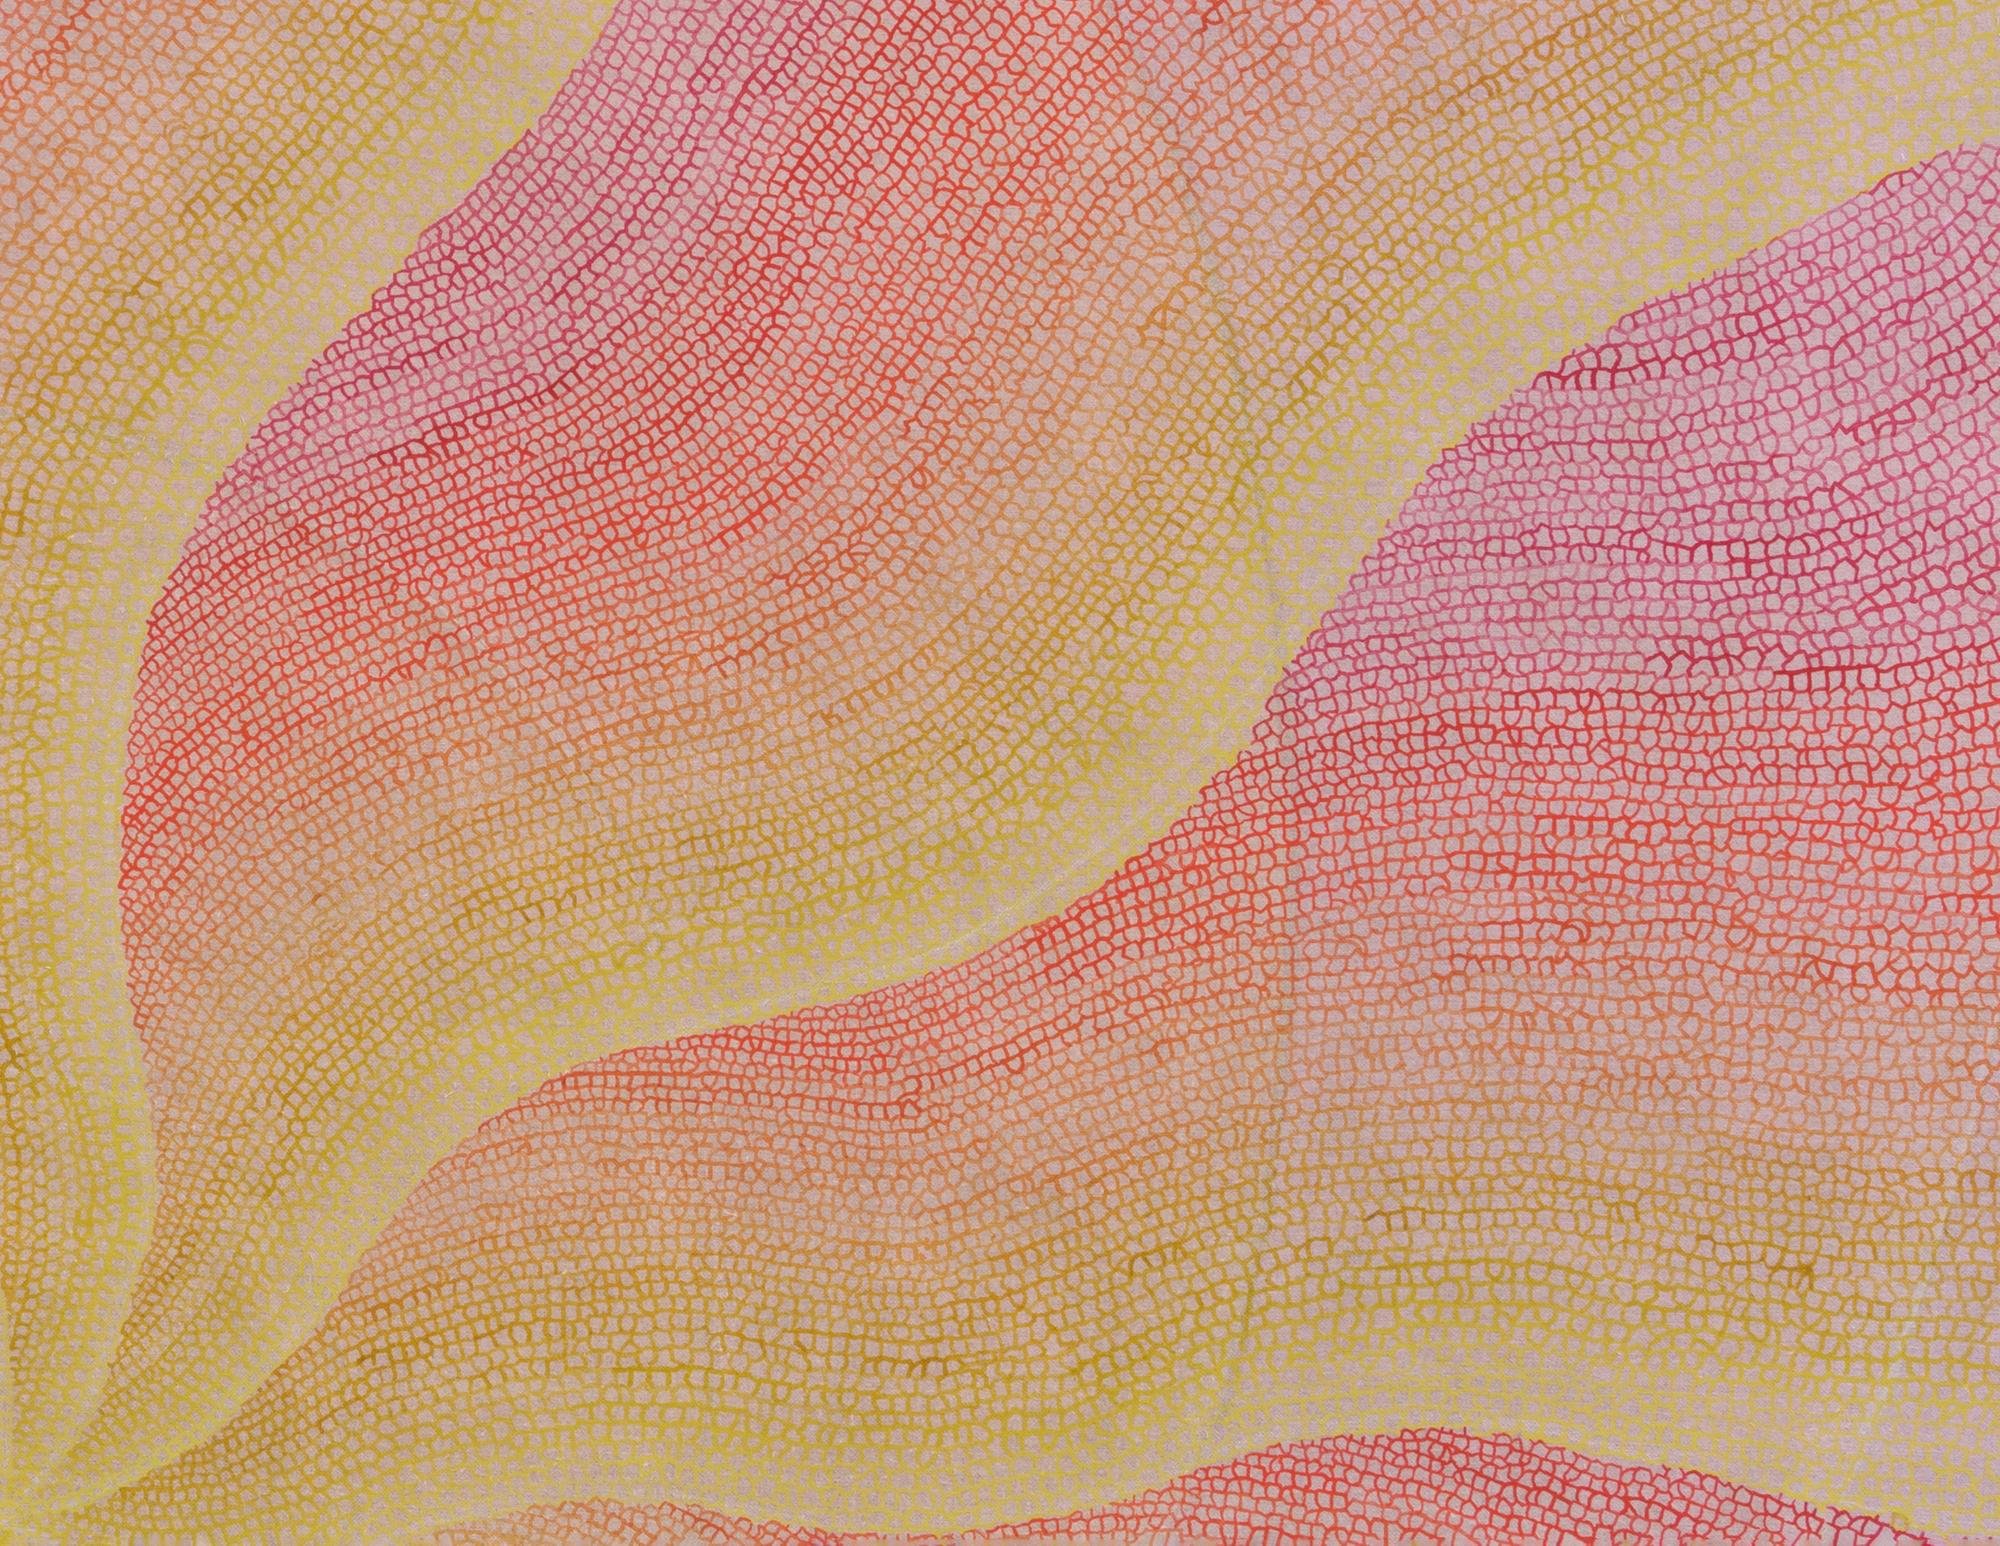    Capitan, Rubellite Sky (detail), 2023, acrylic and iridescent pigments on linen 72 x 60 inches, 182.9 x 152.4 cm / Photo: Steven Probert   